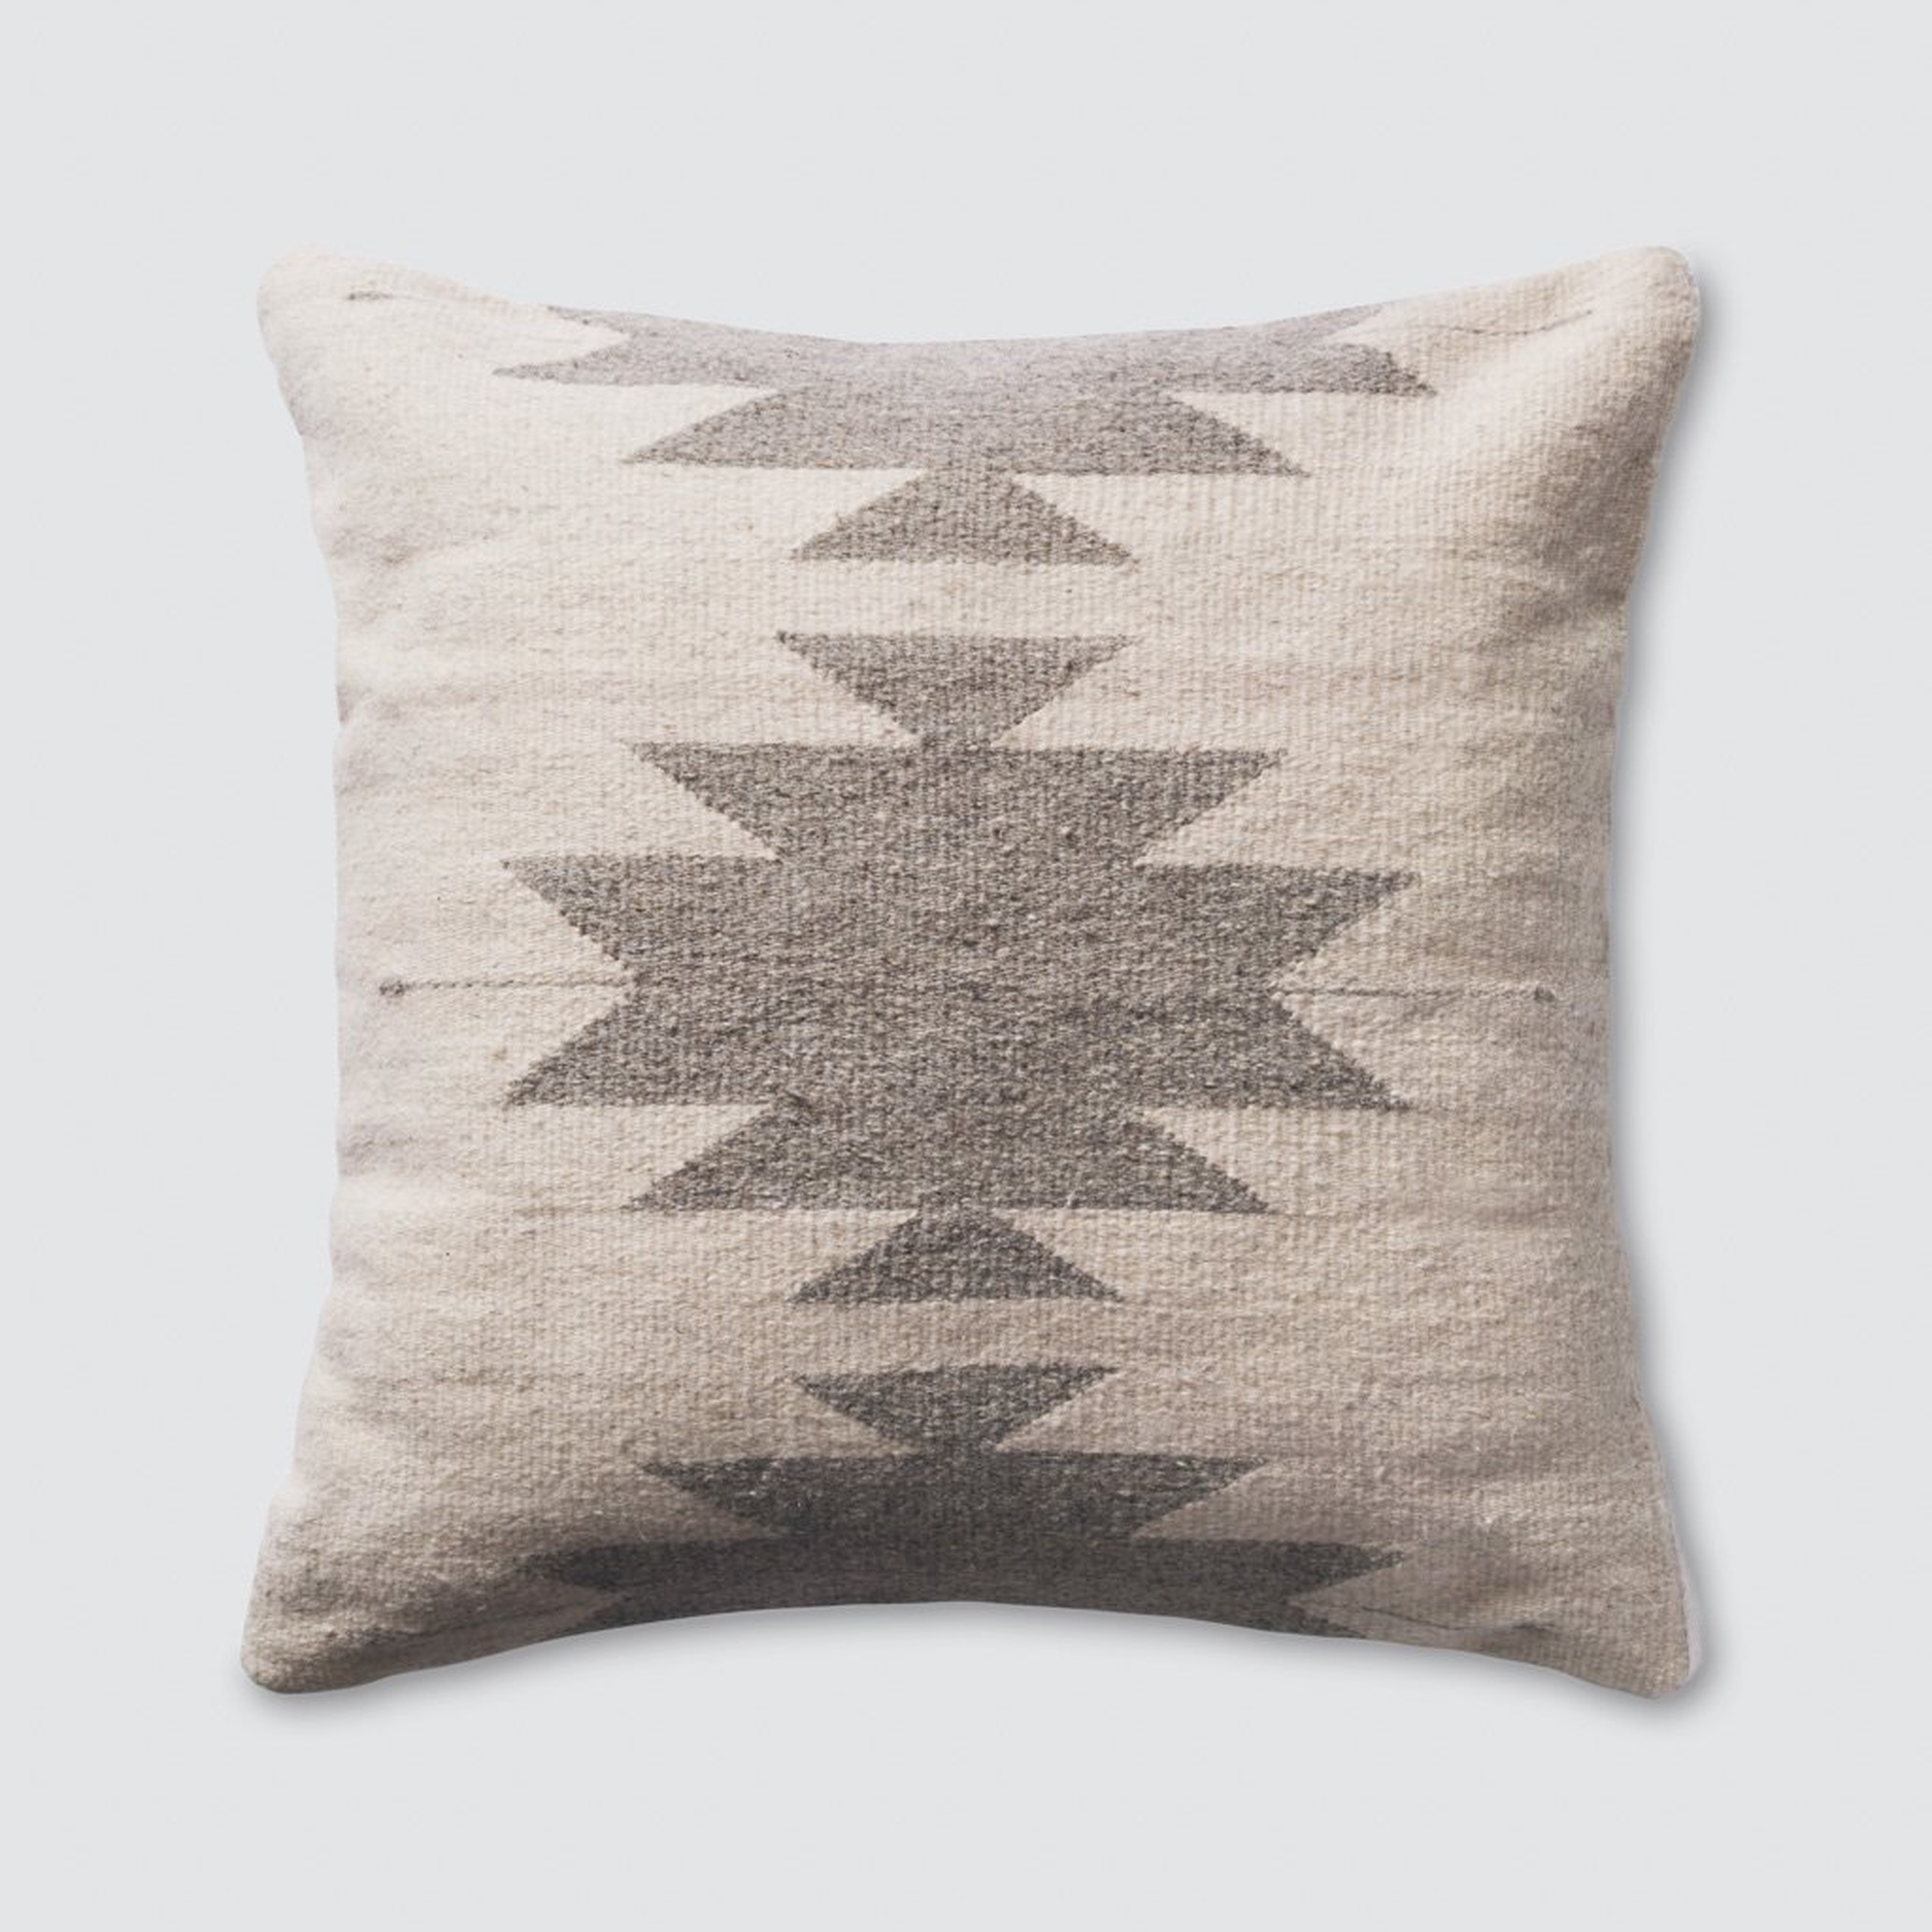 Tobala Pillow - Cream By The Citizenry - The Citizenry